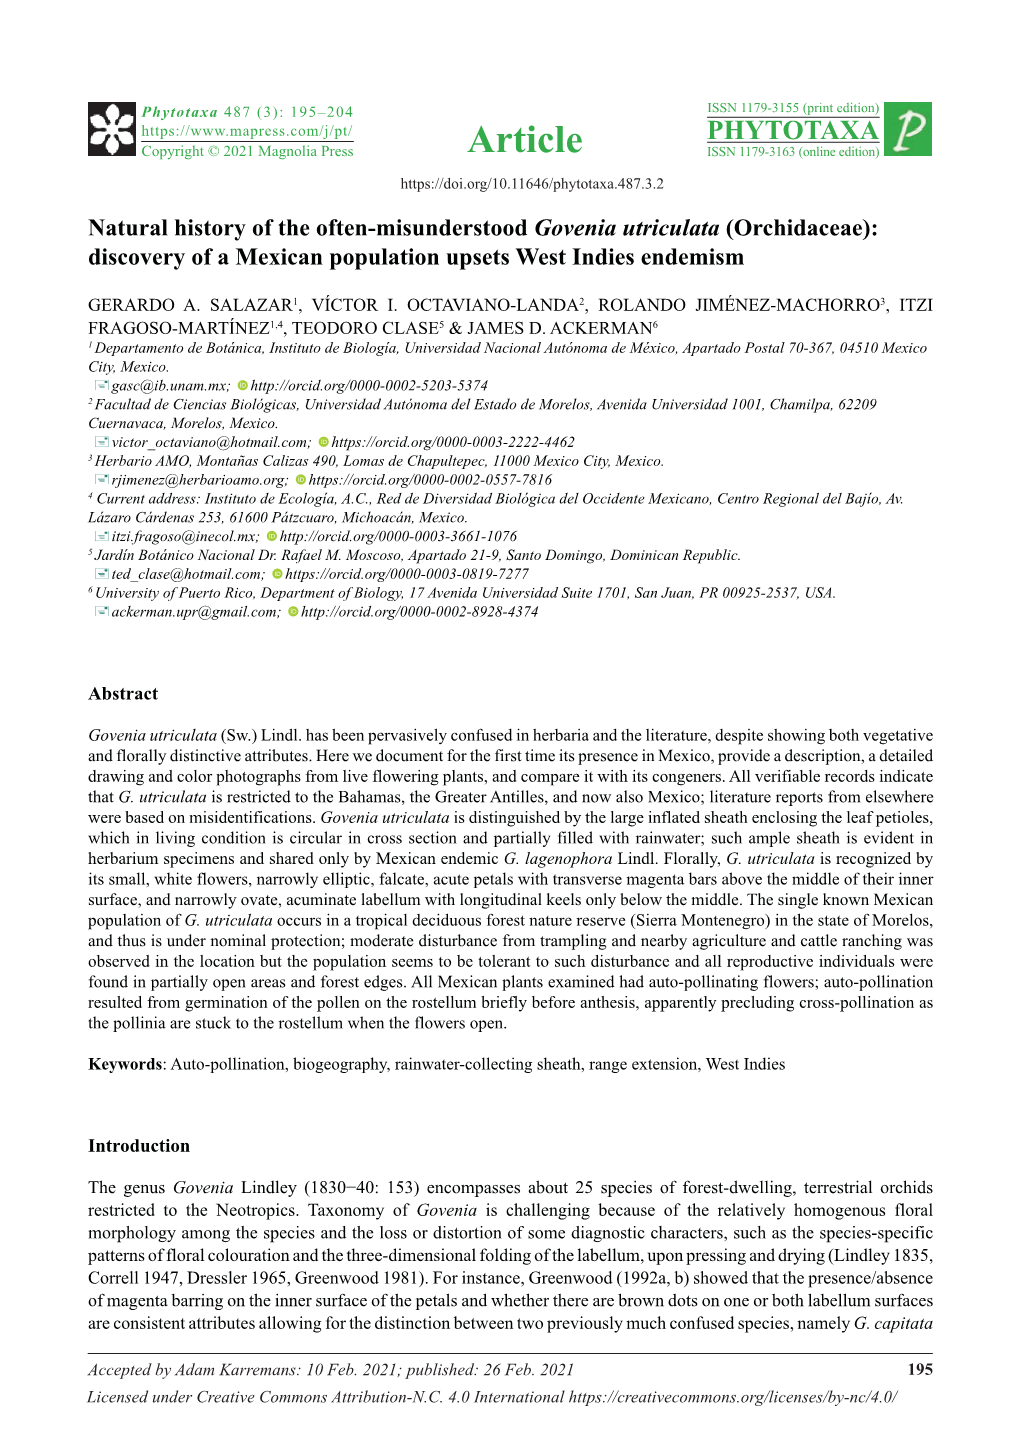 Natural History of the Often-Misunderstood Govenia Utriculata (Orchidaceae): Discovery of a Mexican Population Upsets West Indies Endemism